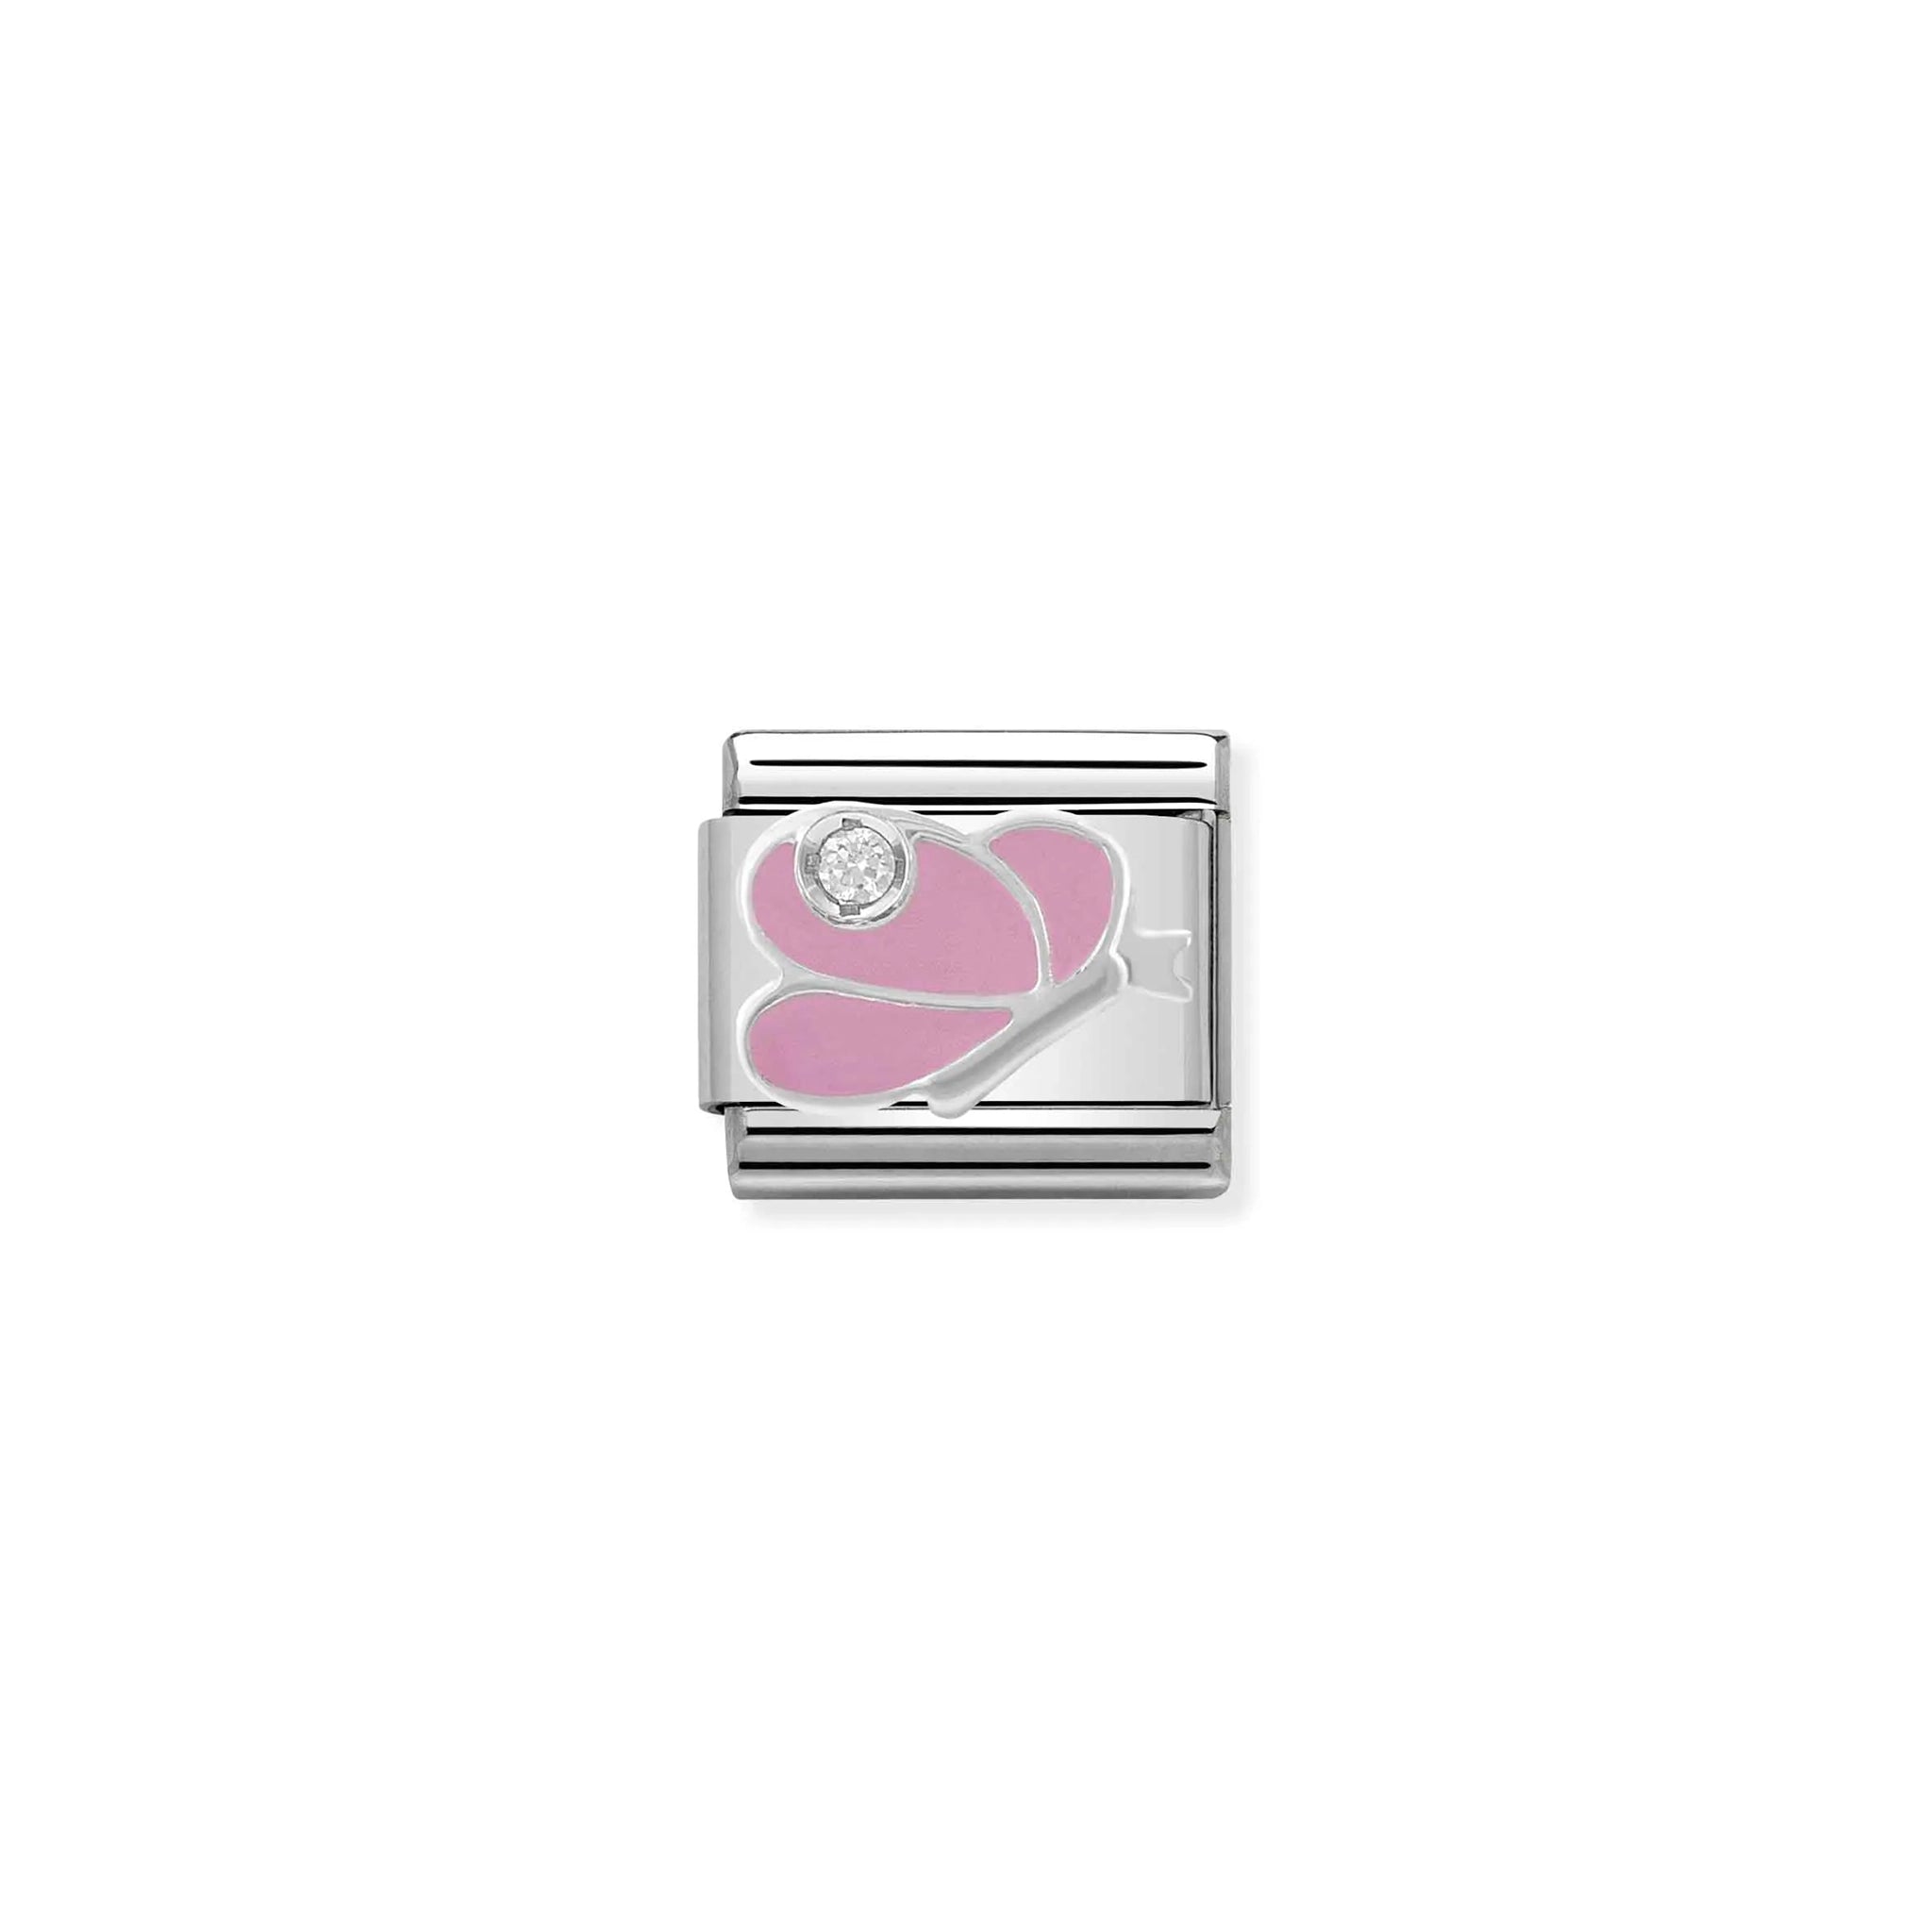 Nomination charm link featuring a silver butterfly with pink enamel and a small CZ stone